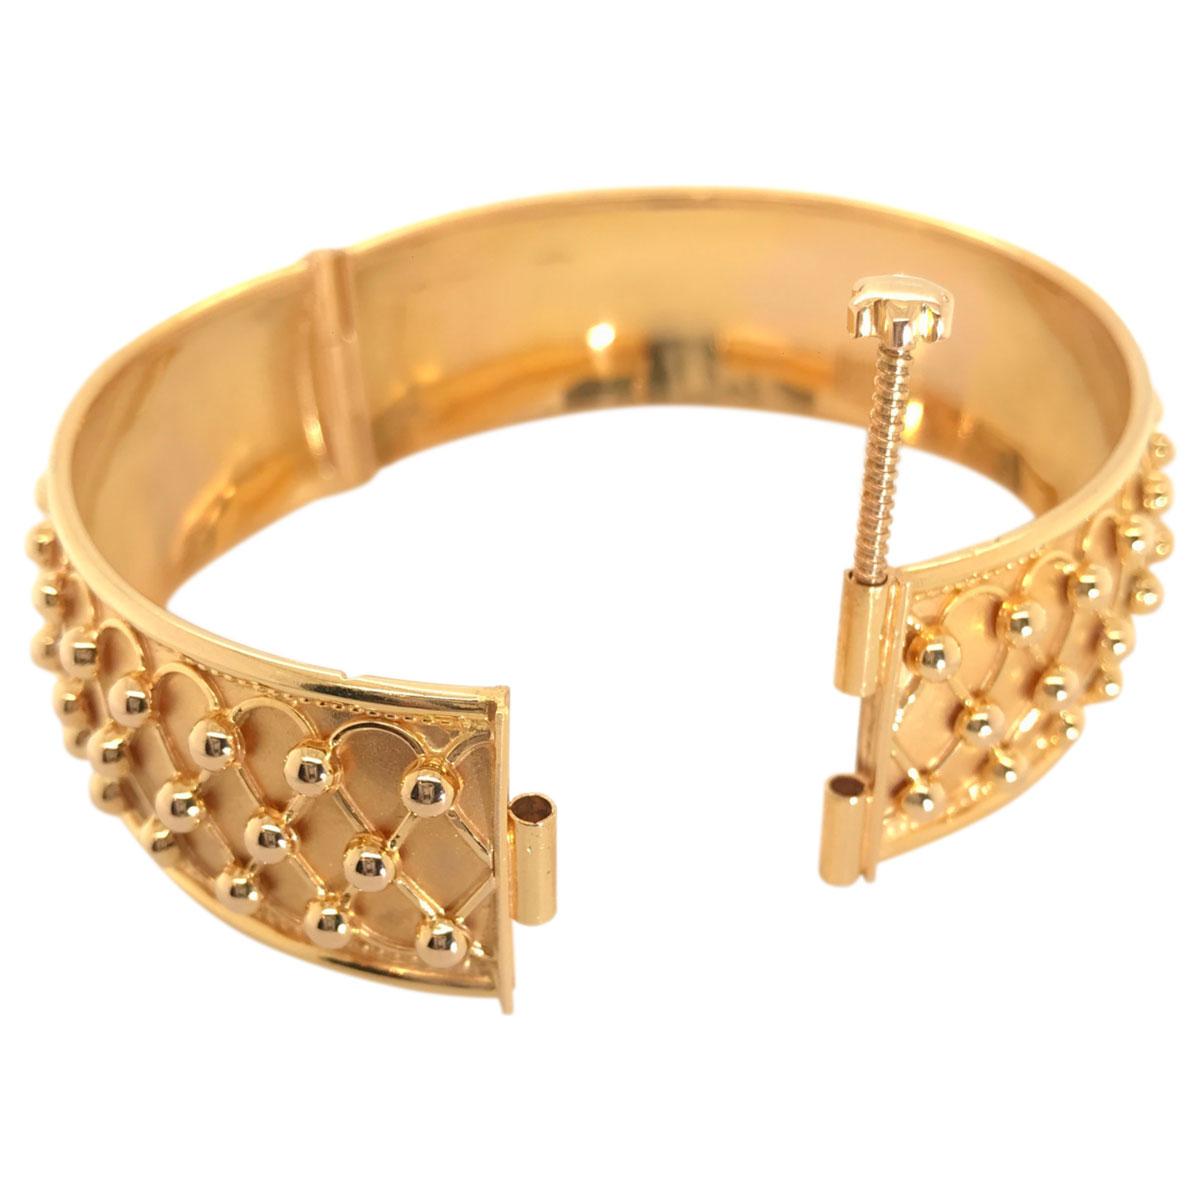 Intricately detailed and beautifully crafted from 21k yellow gold, this bangle has style and sophistication. Feels good on the wrist and has a bold gold look to it. It could be worn alone or it would look just as fabulous layered with other bangles